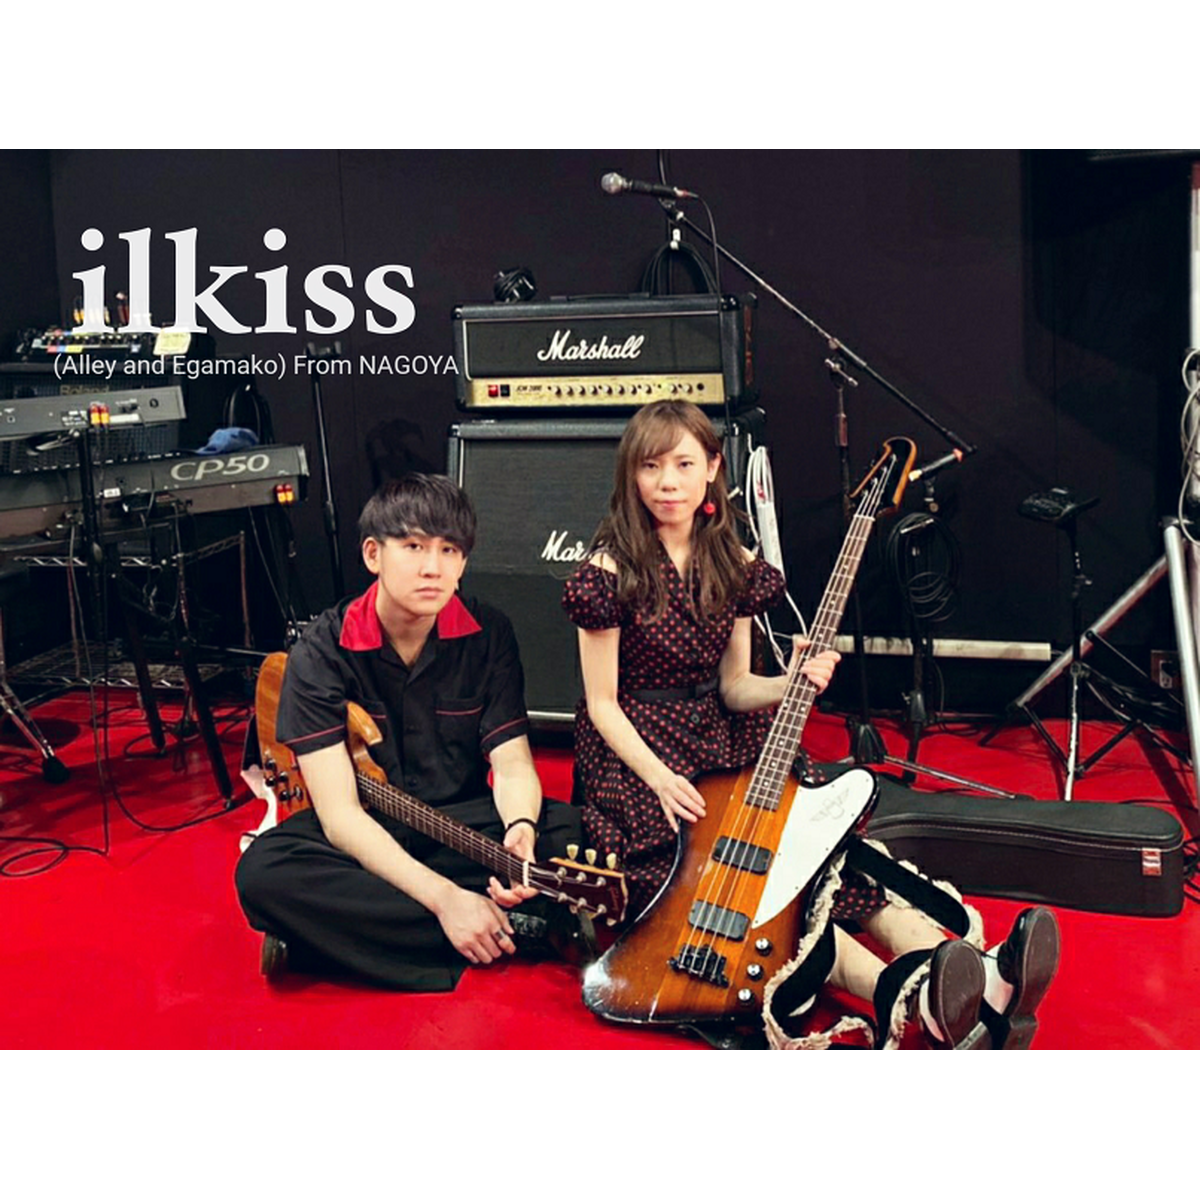 About Ilkiss